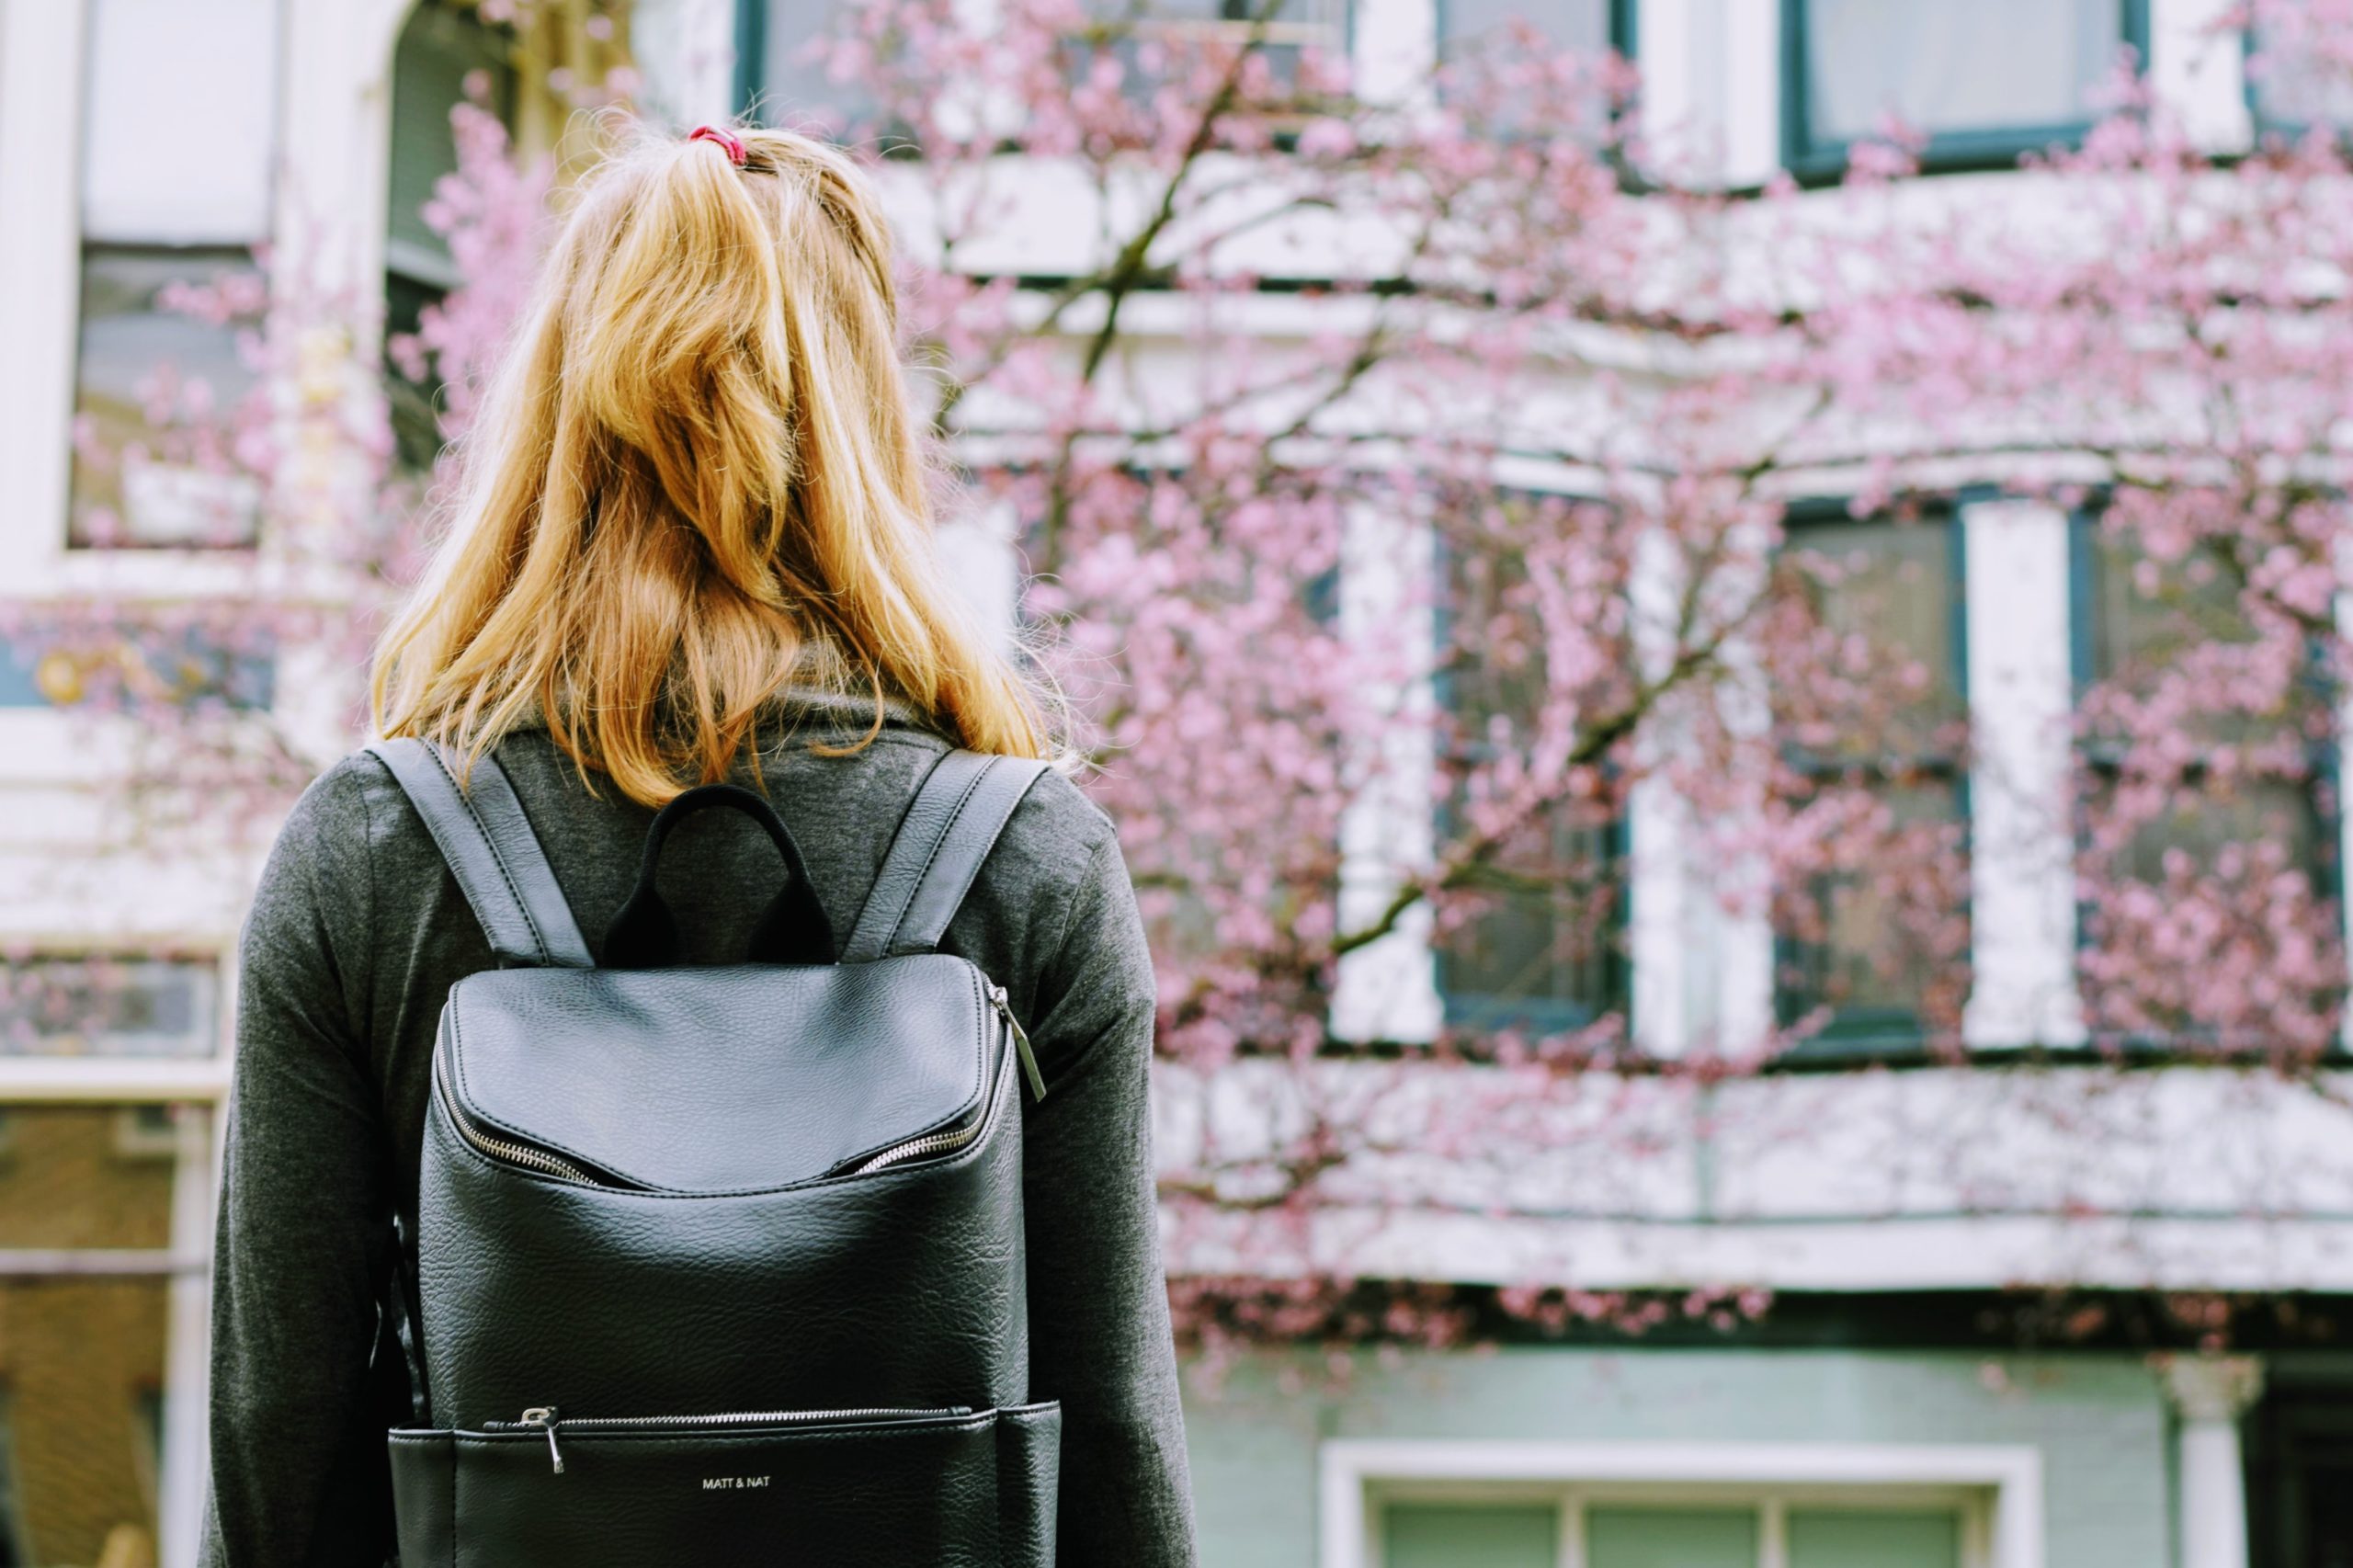 student with bookbag on college campus in spring